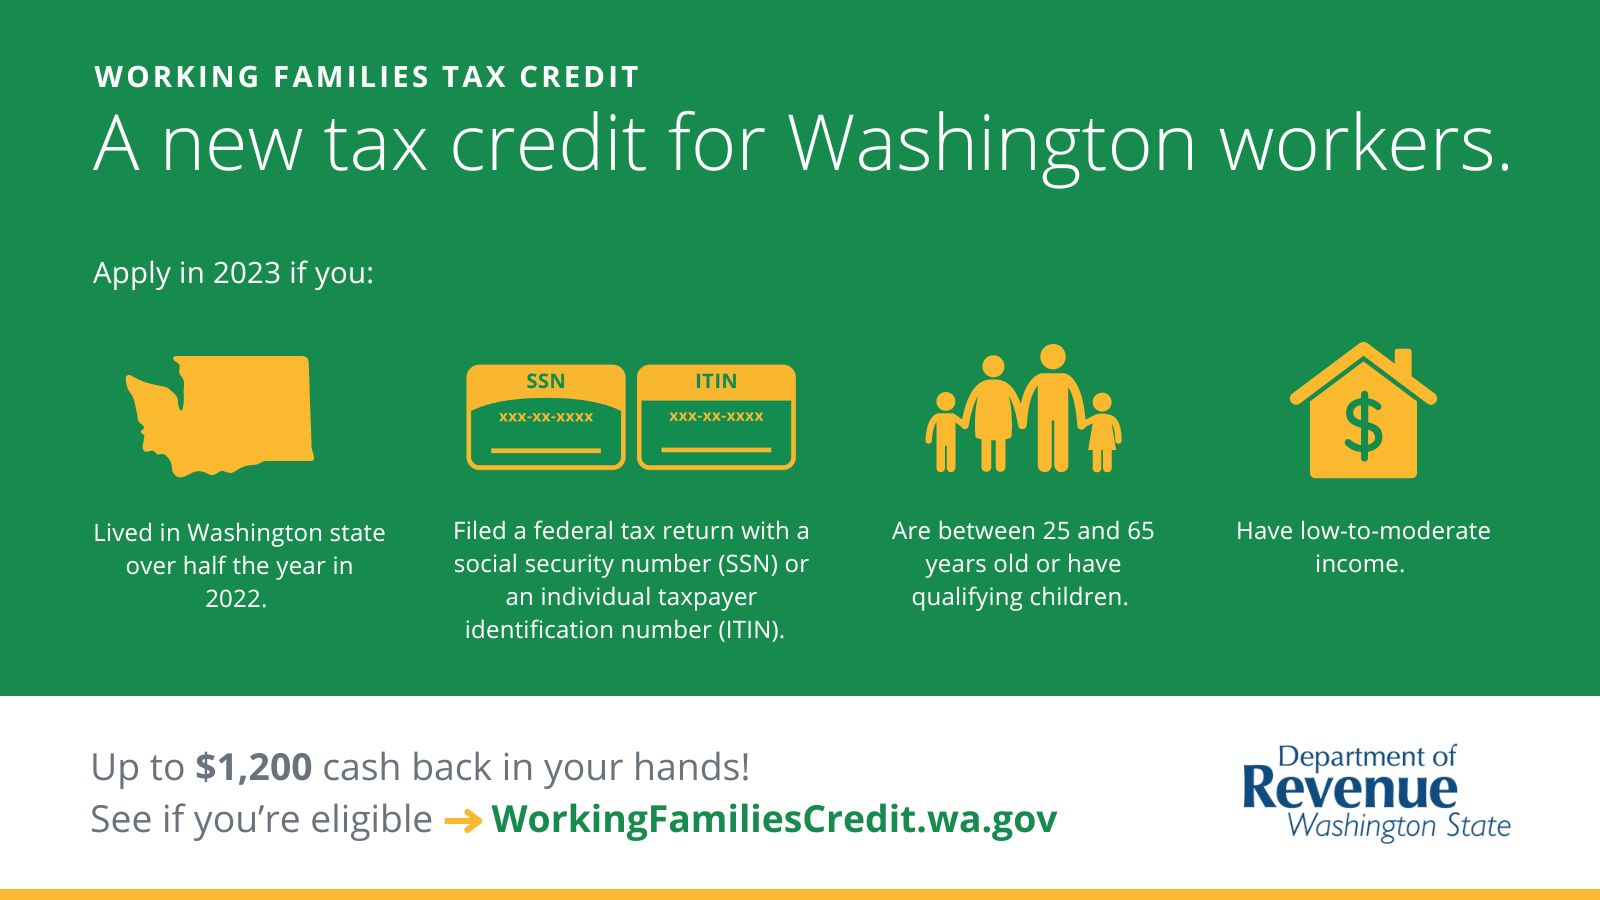 Graphic on Working Families Tax Credit, info available at link in paragraph below